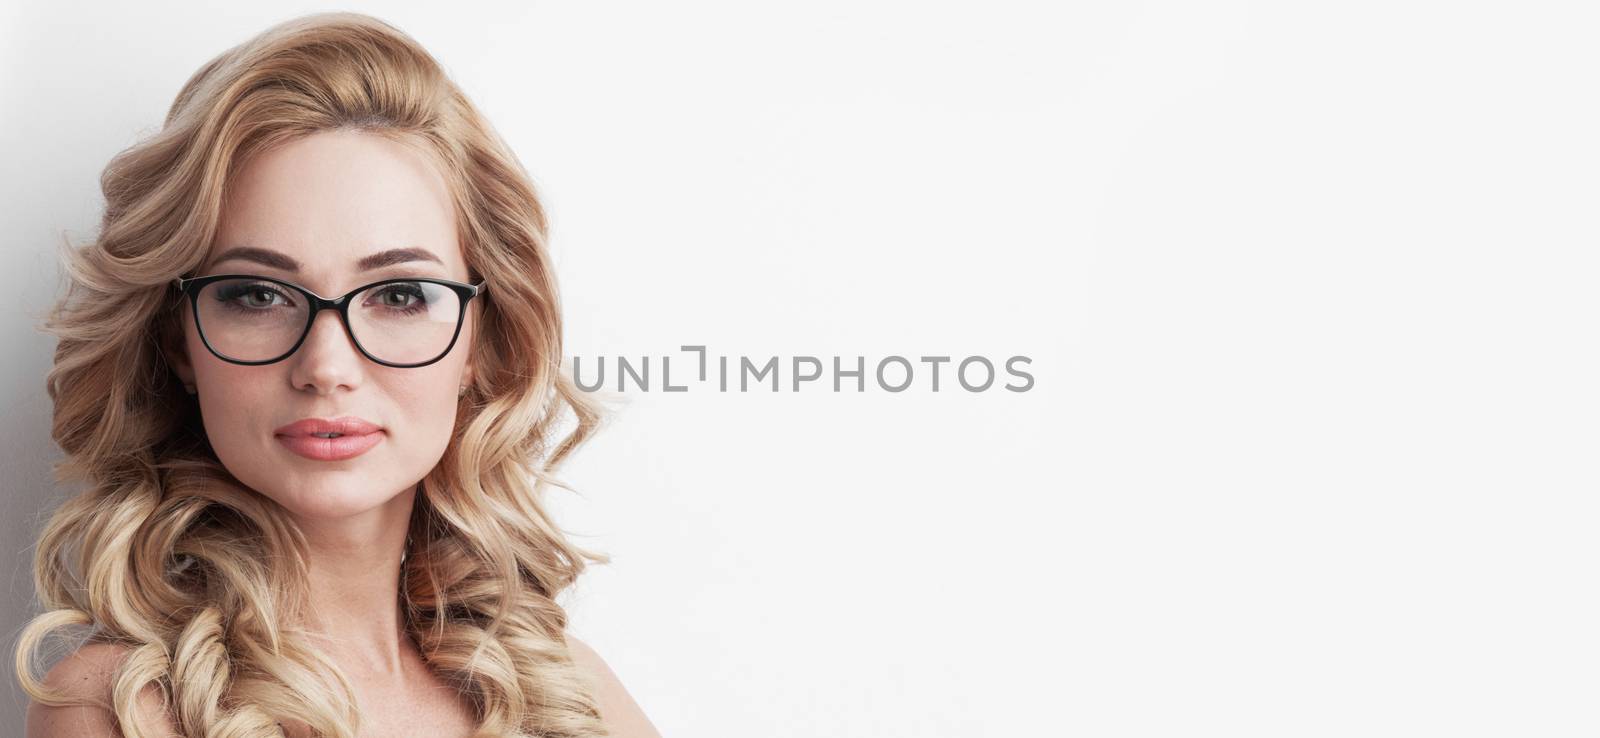 Portrait of beautiful caucasian blonde woman with curly hair standing on white background. Young business woman with glasses looking at camera